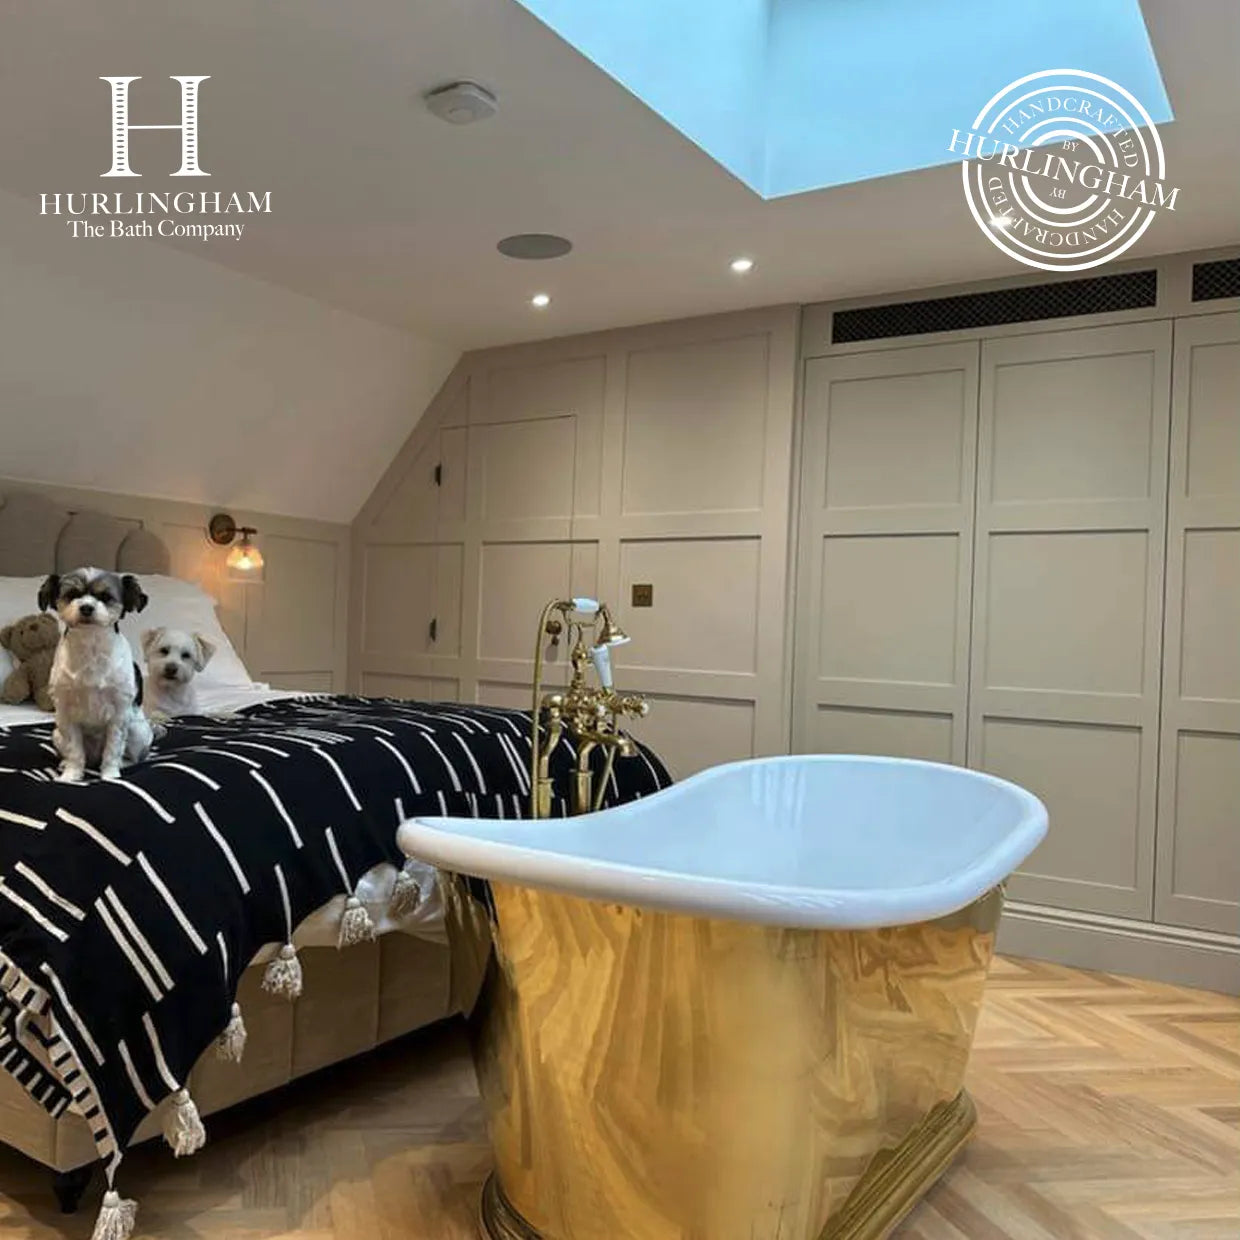 Hurlingham Brass Bulle Freestanding Bath Roll Top Bathtub for within bedroom with white enamel interior in size 1700mm x 740mm SS084